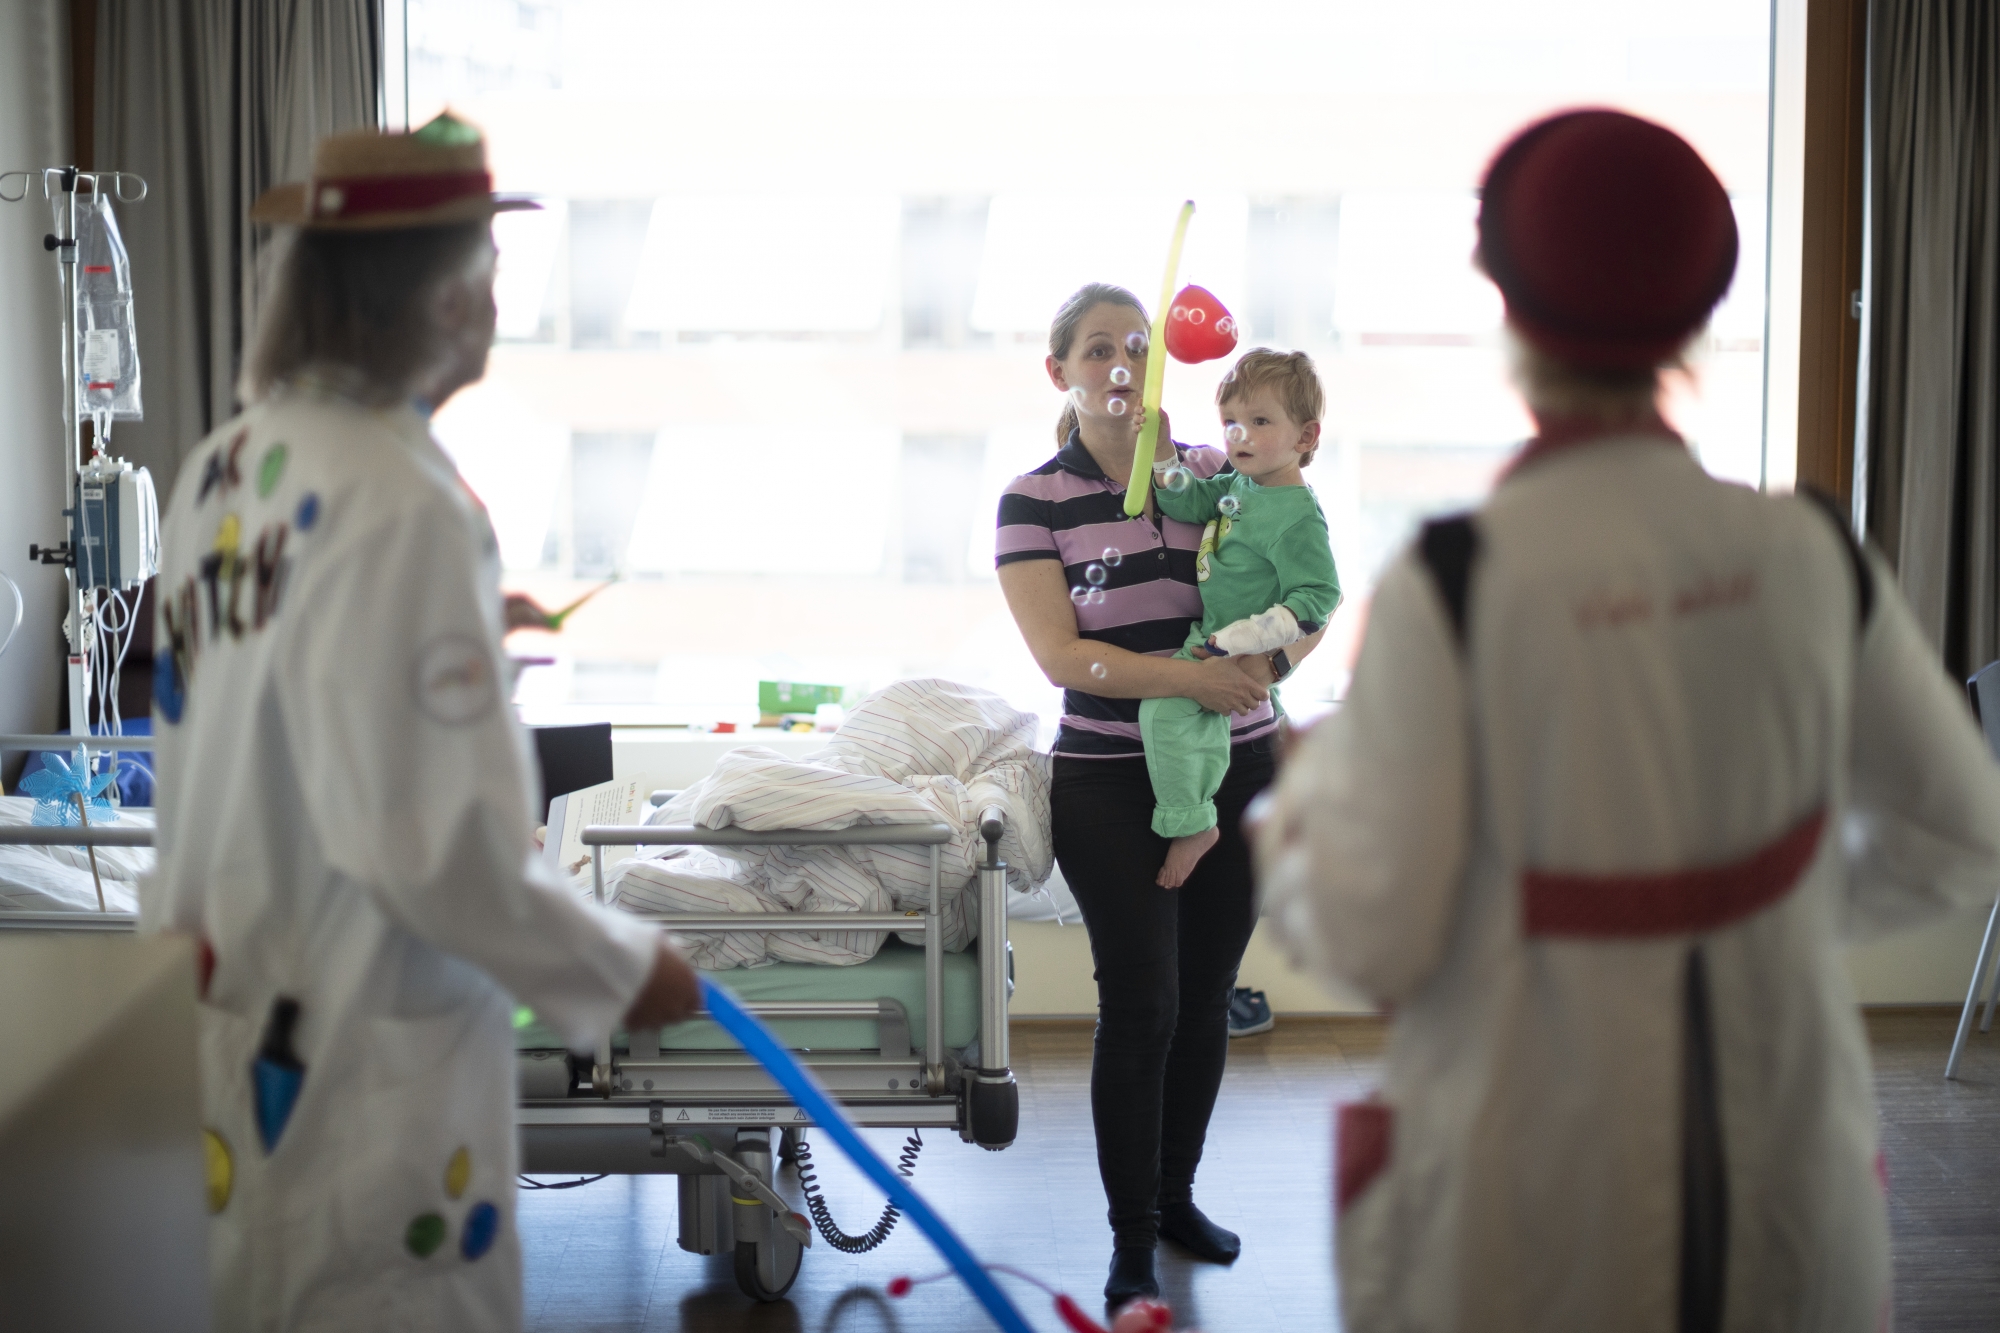 Hospital clowns of the Theodora Foundation, also referred to as dream doctors, visit a hospitalized child at the University Children's Hospital Basel (UKBB) in Basel, Switzerland, on March 28, 2019. The dream doctors of the Theodora Foundation visit children in hospitals, hospices and specialist care centres. (KEYSTONE/Gaetan Bally)